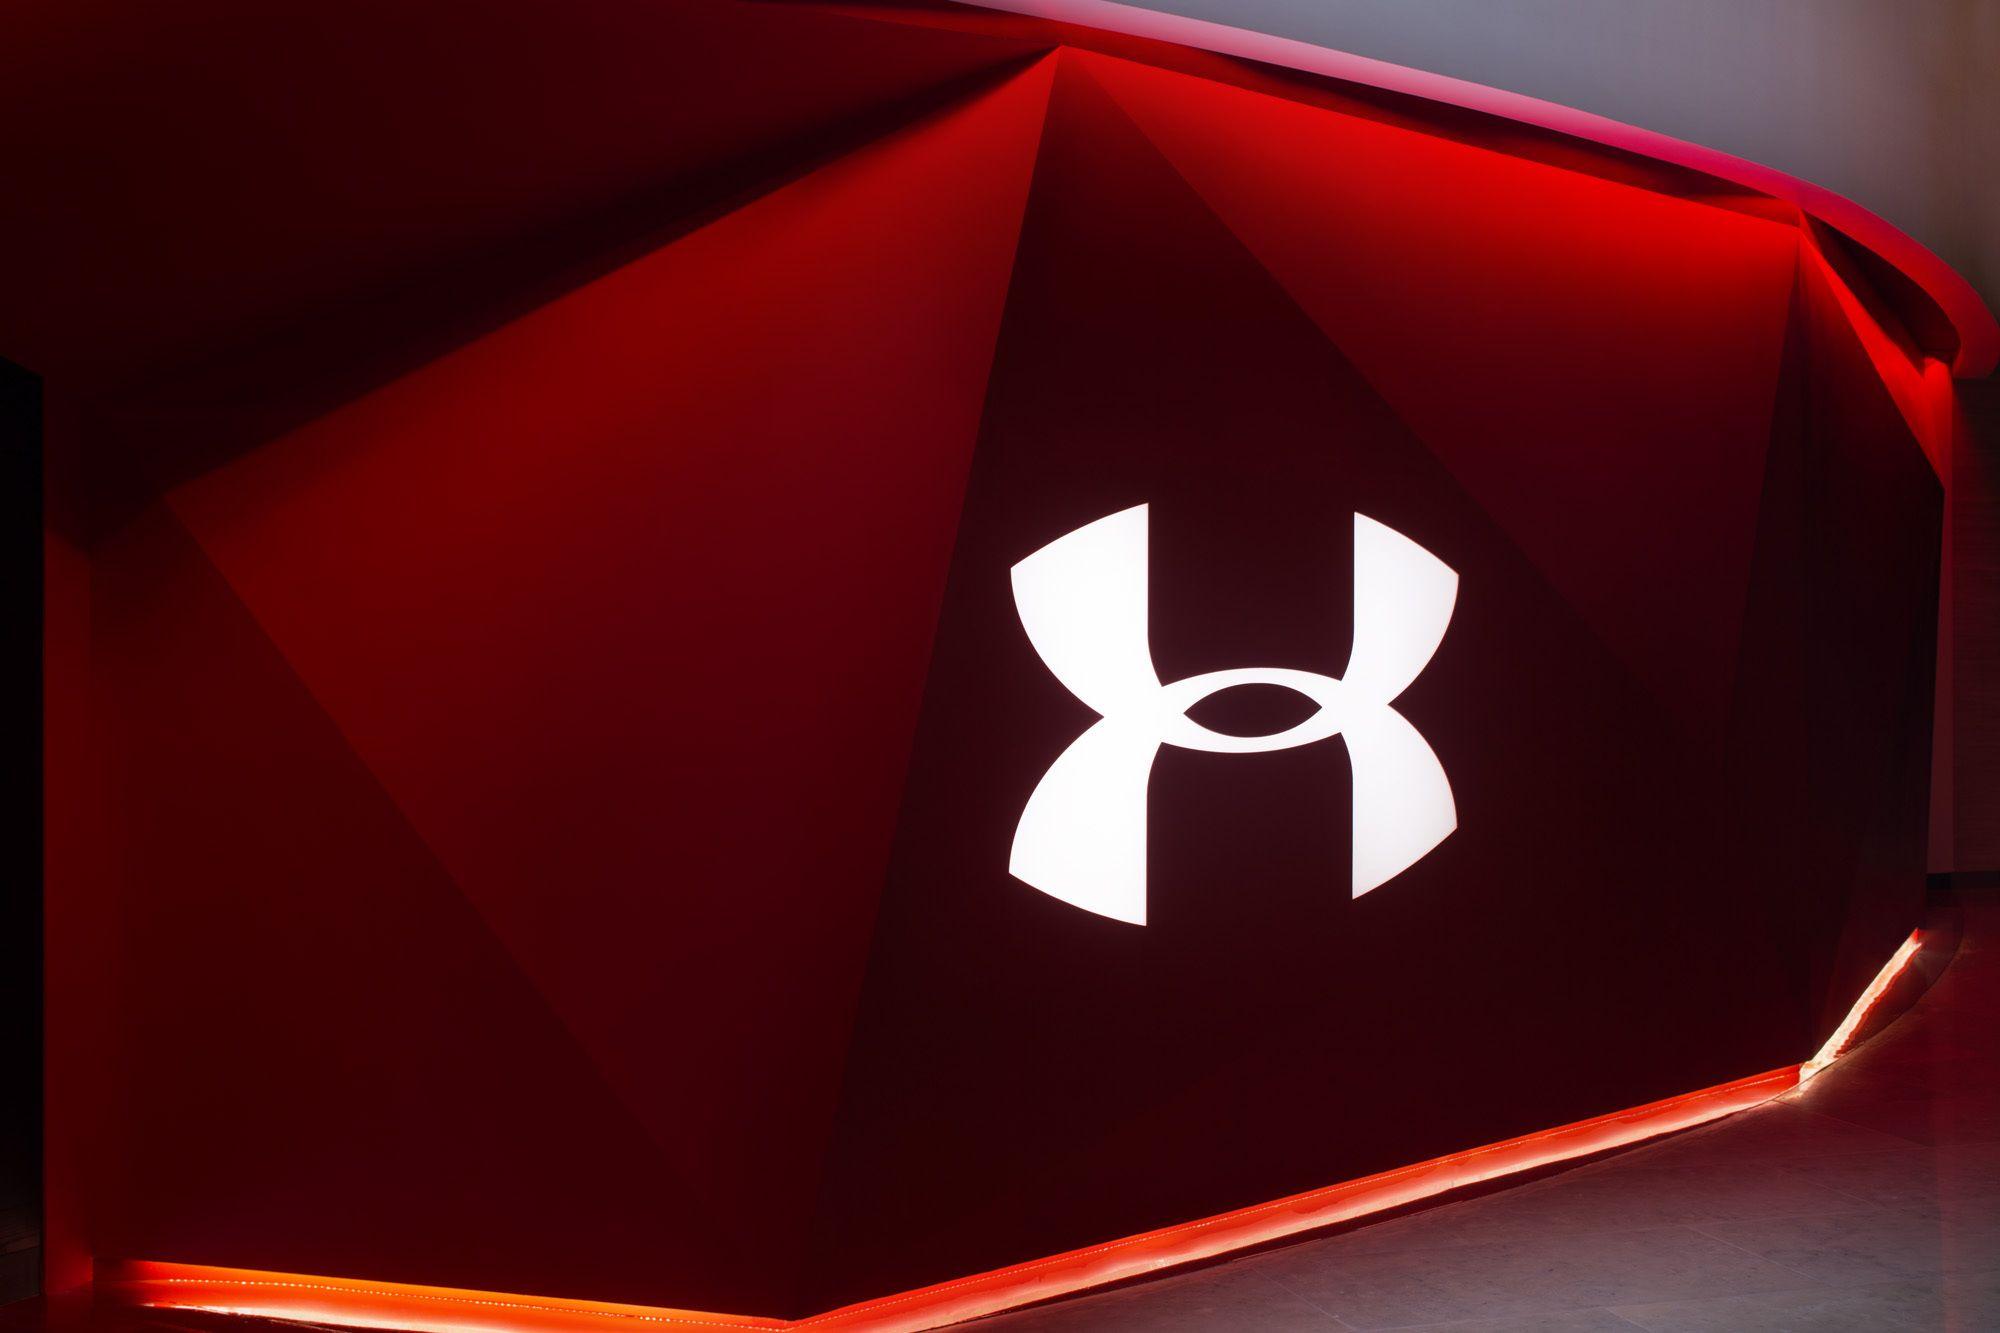 Awesome Under Armour Logo - Best 58+ Under Armour Wallpaper on HipWallpaper | Under Armour ...